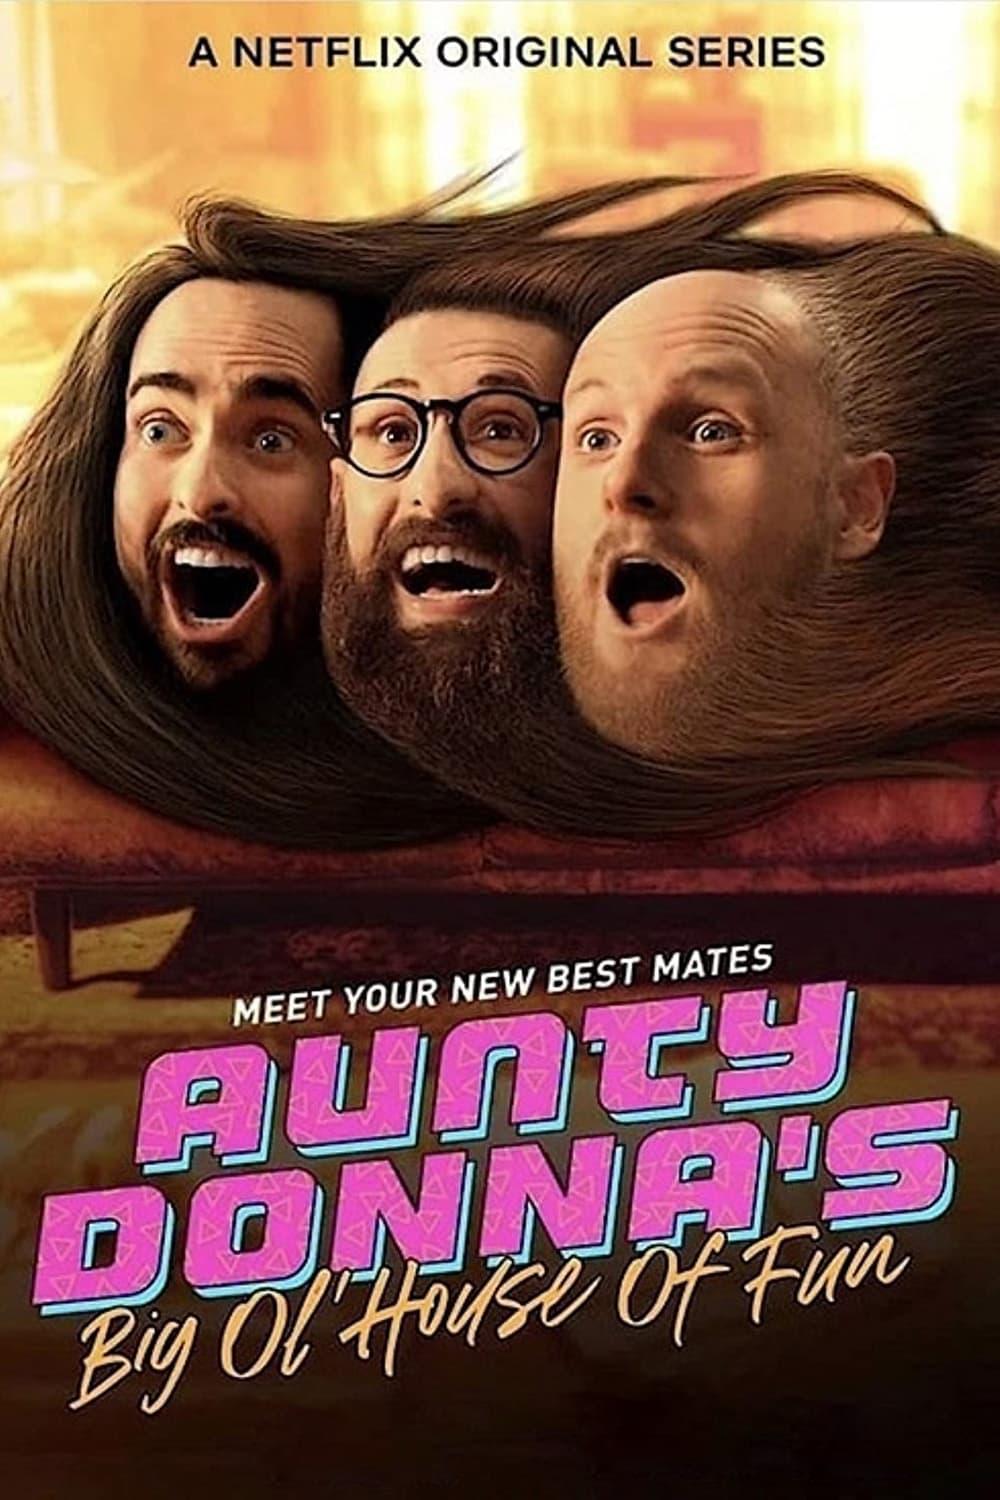 Aunty Donna's Big Ol House of Fun poster